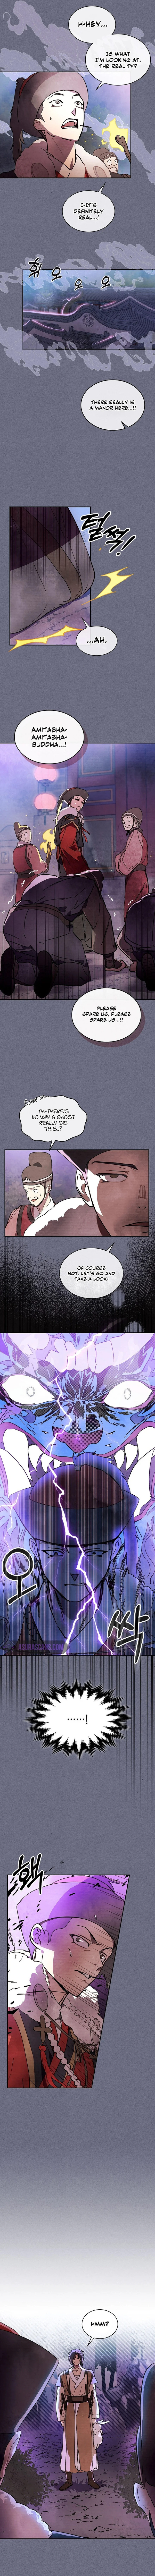 Chronicles Of The Martial God’s Return - Chapter 4 Page 4